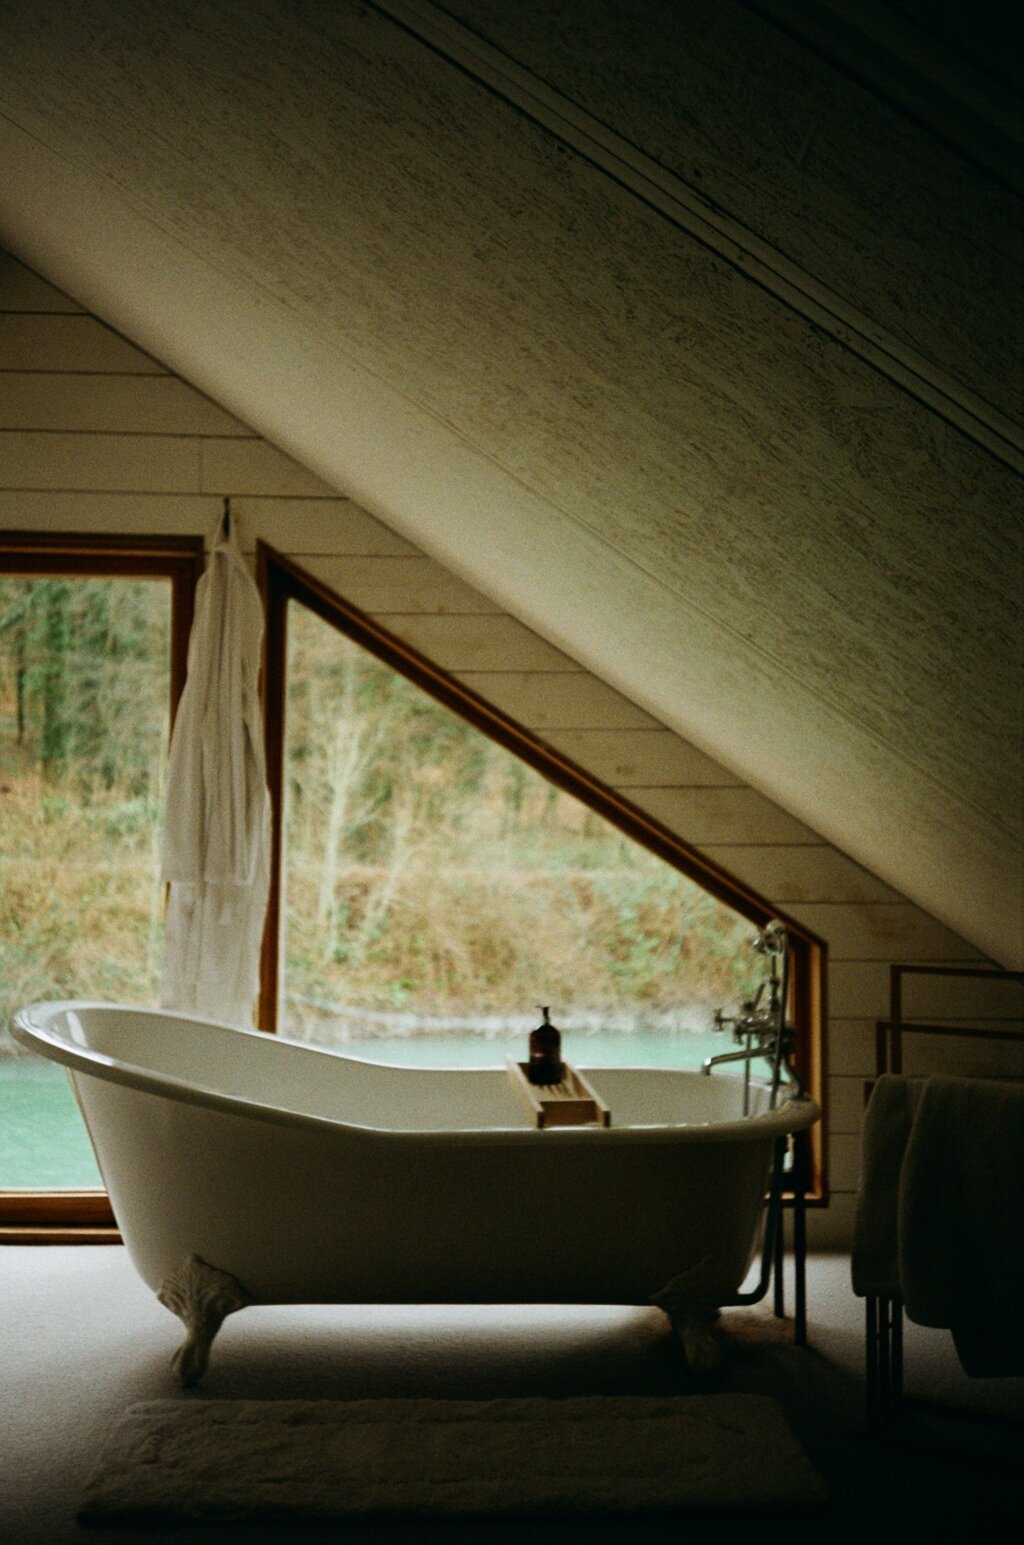 Bath tub at Ditchling Cabin, Canopy and Stars